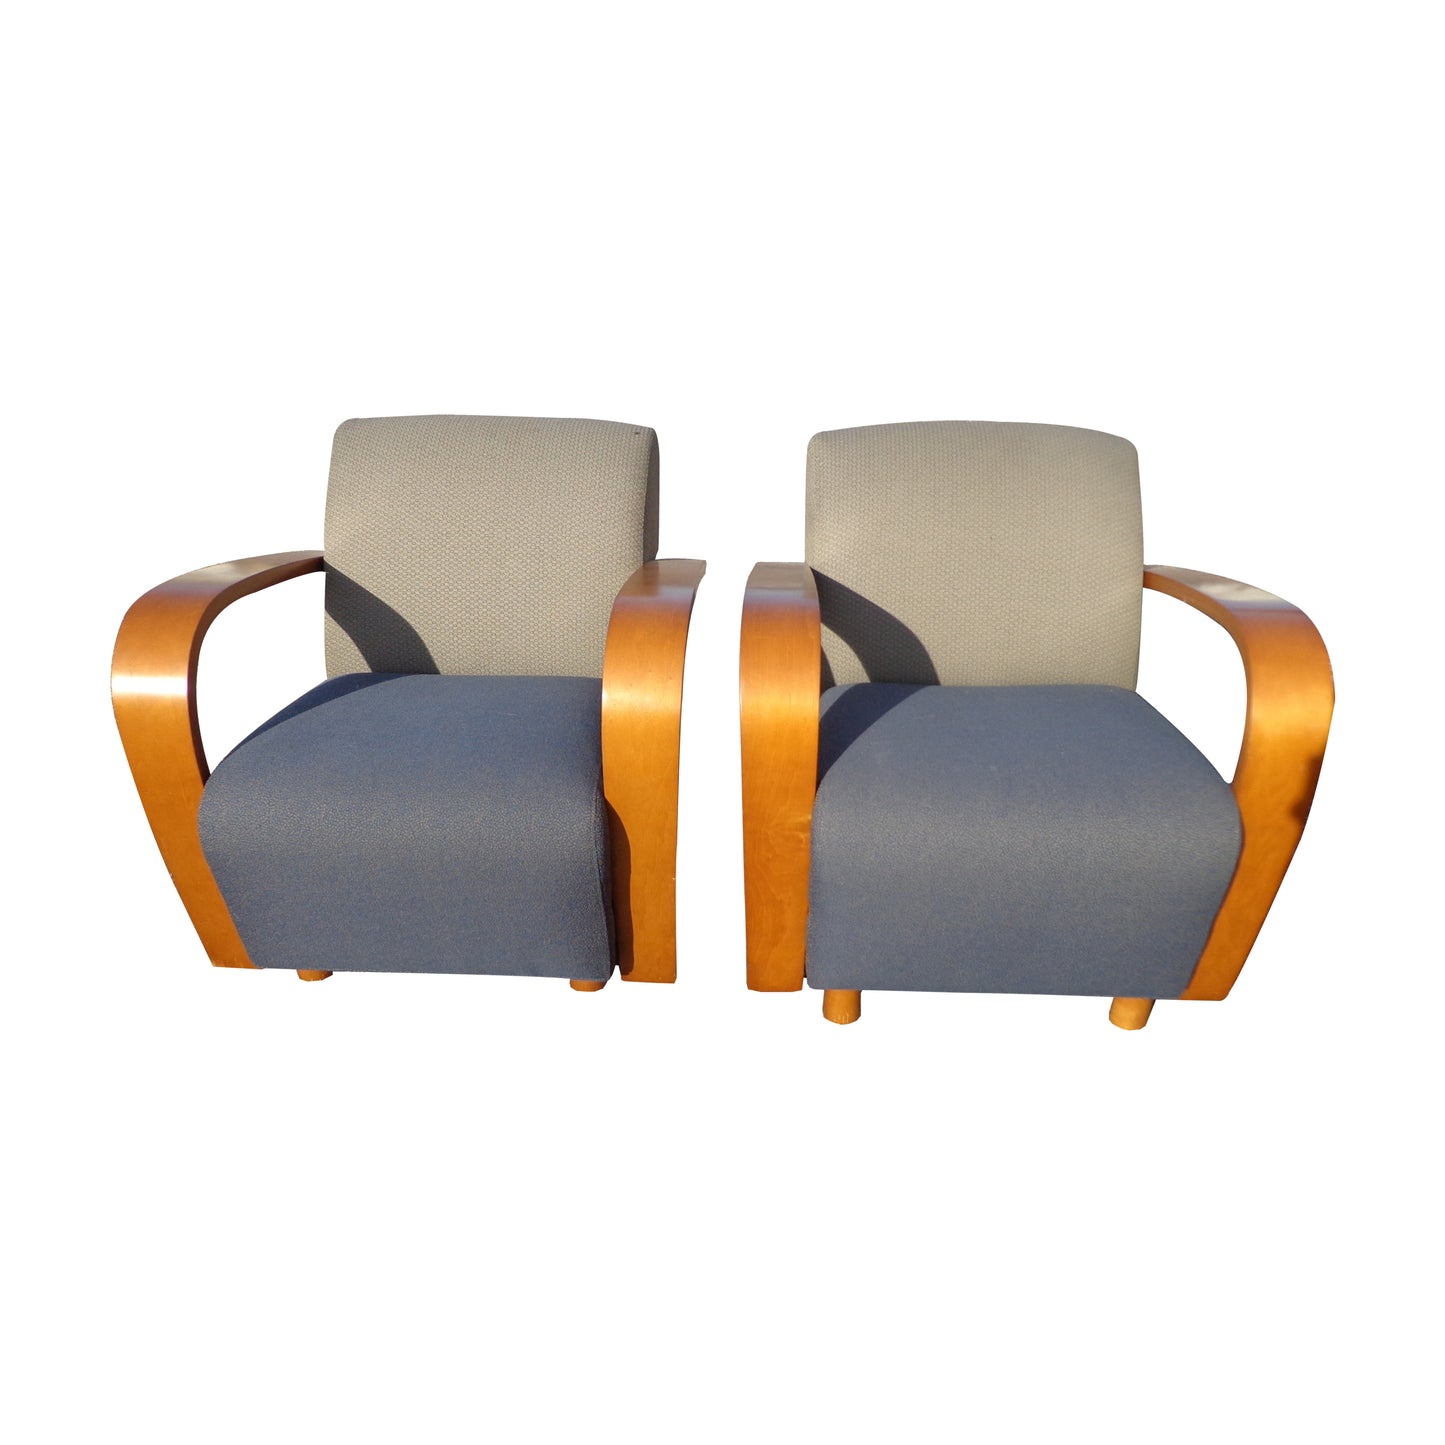 Pair of Cartwright Lounge Chairs